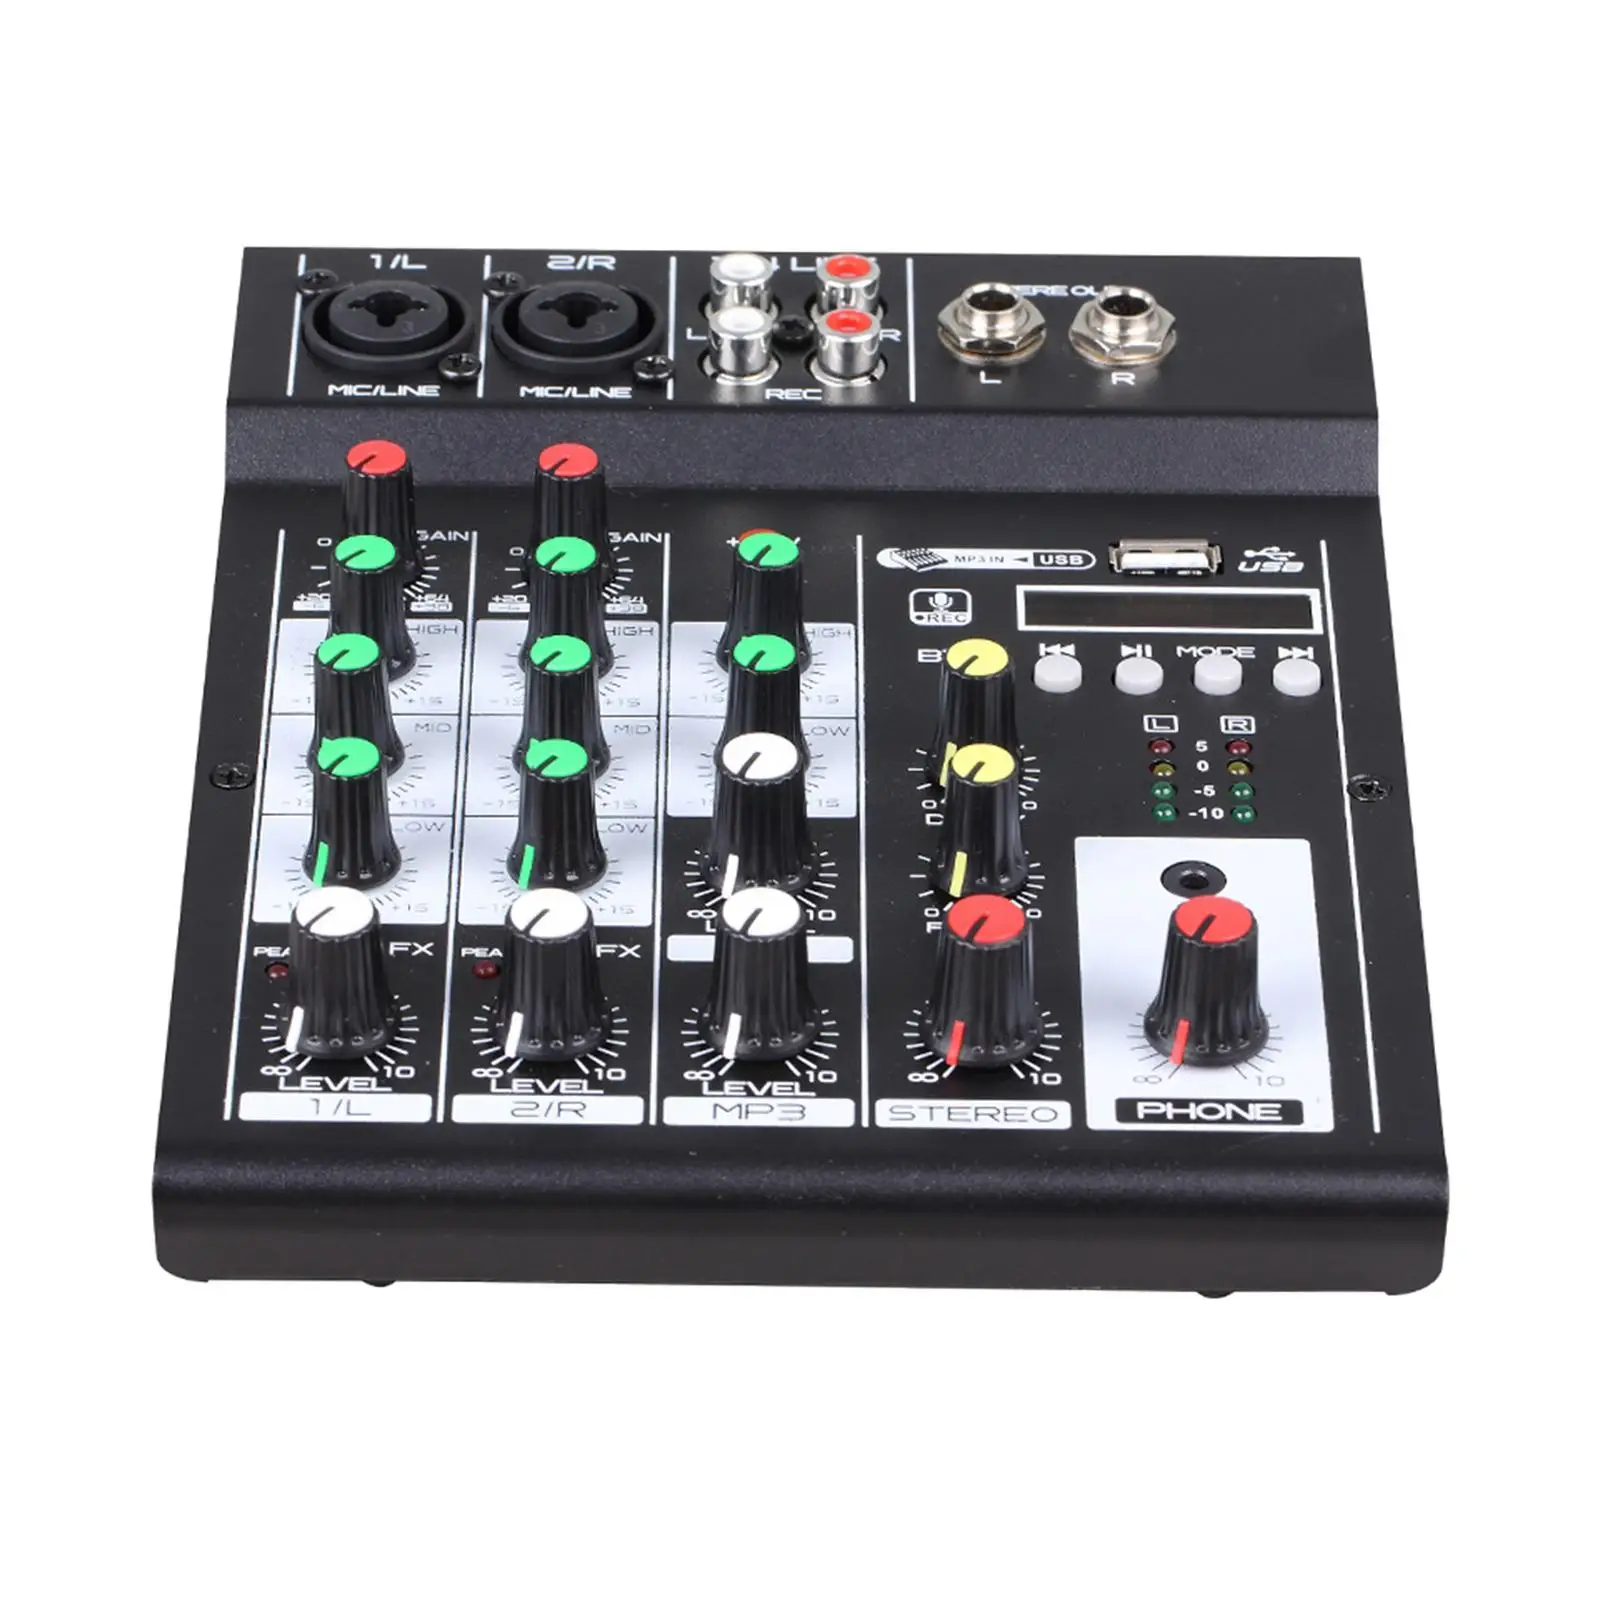 4 Channel Audio Mixer with USB Ports Sound Mixer for DJ studio Webcast